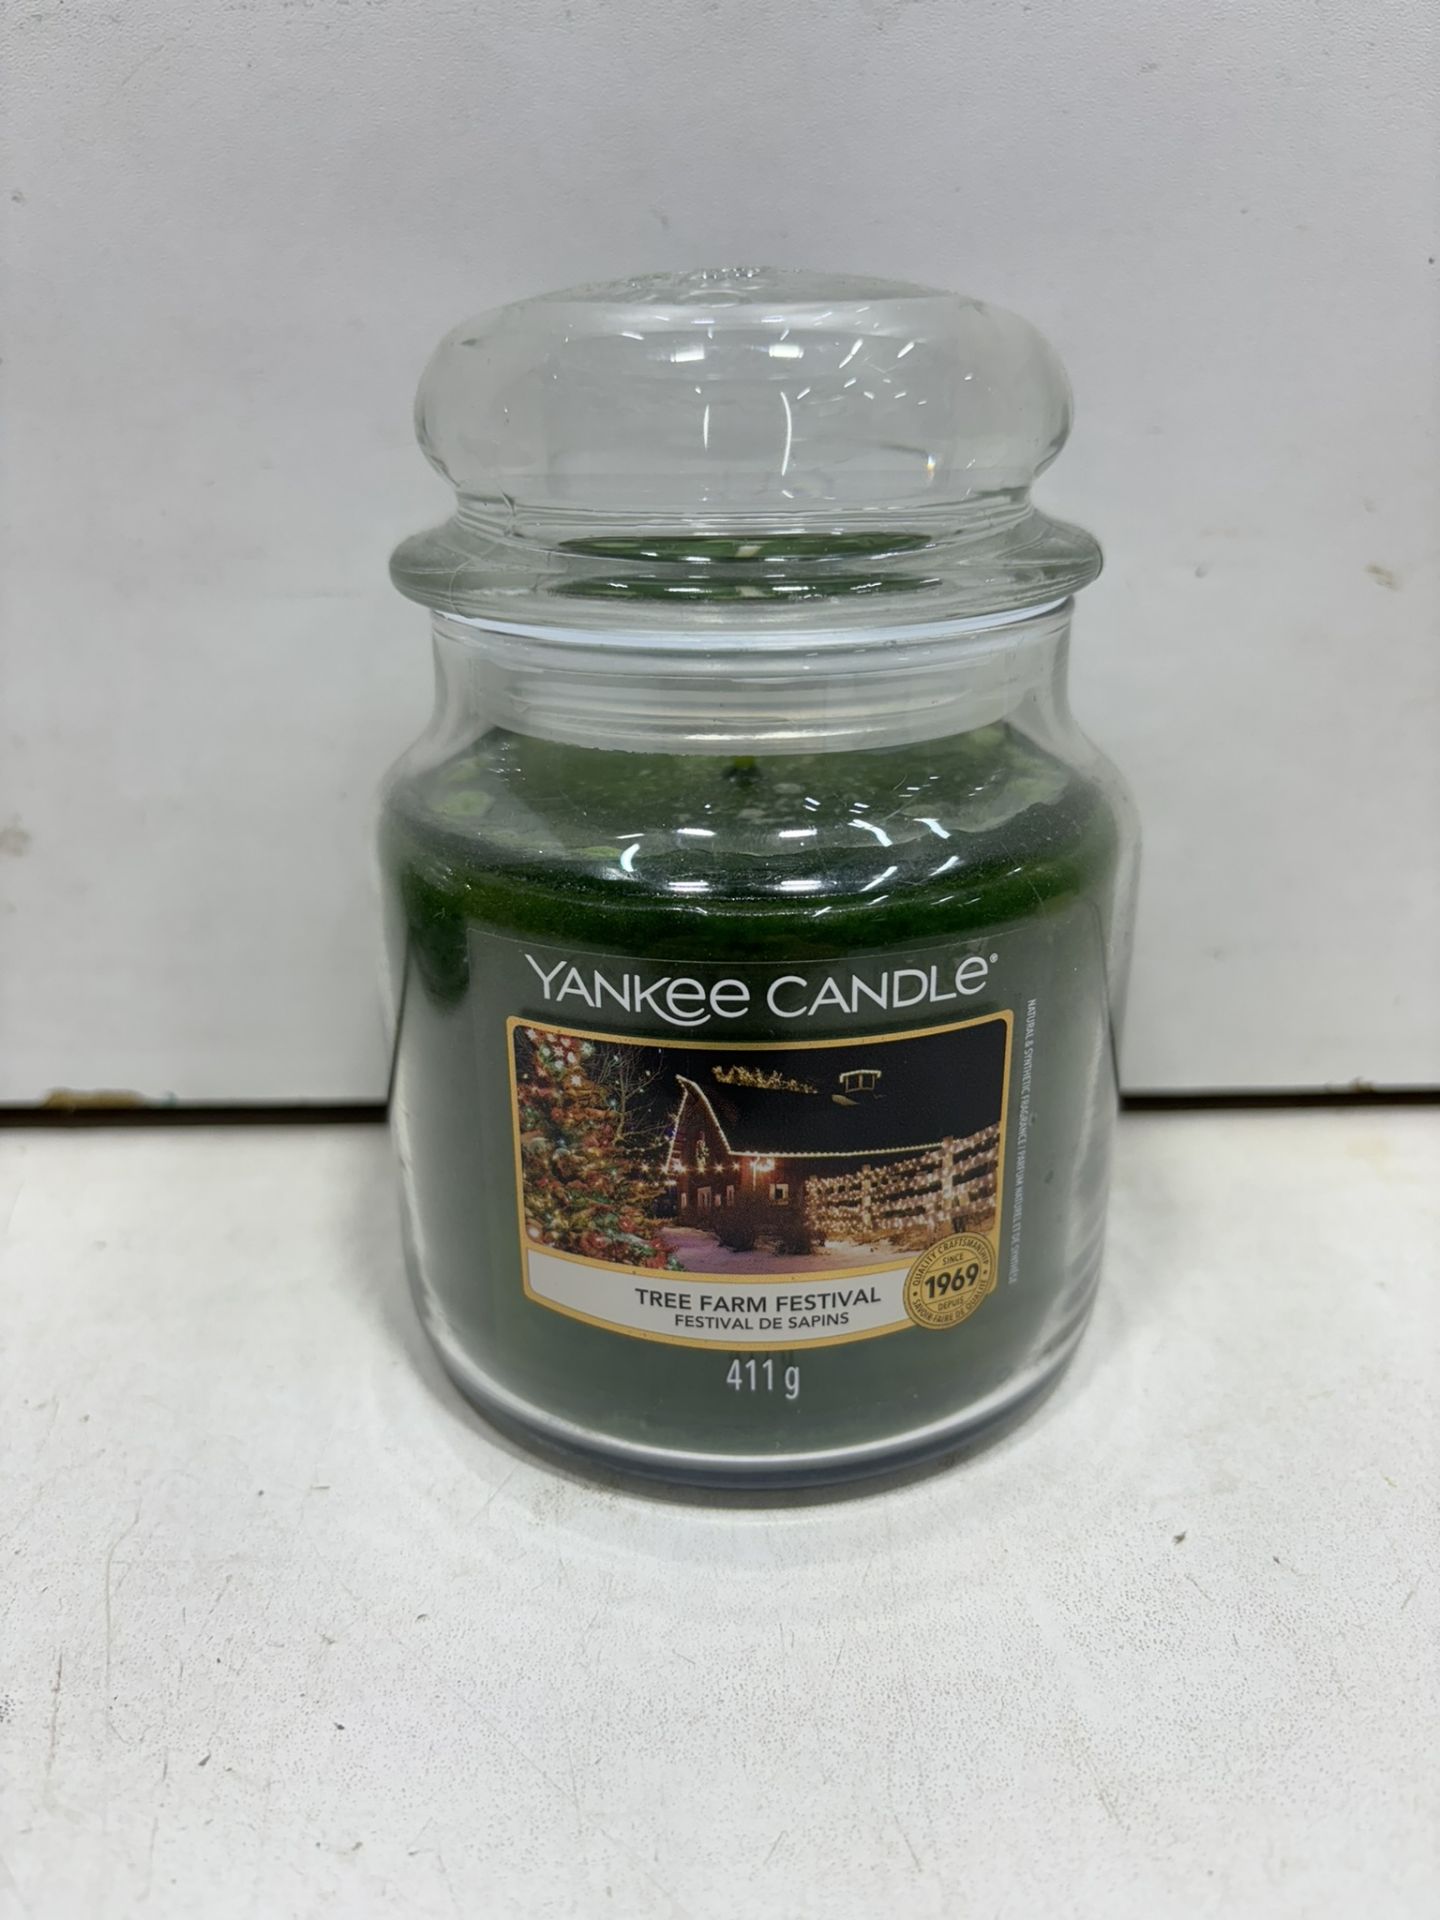 27 x Various Scented Medium Jar Yankee Candles - See Description - Image 2 of 3